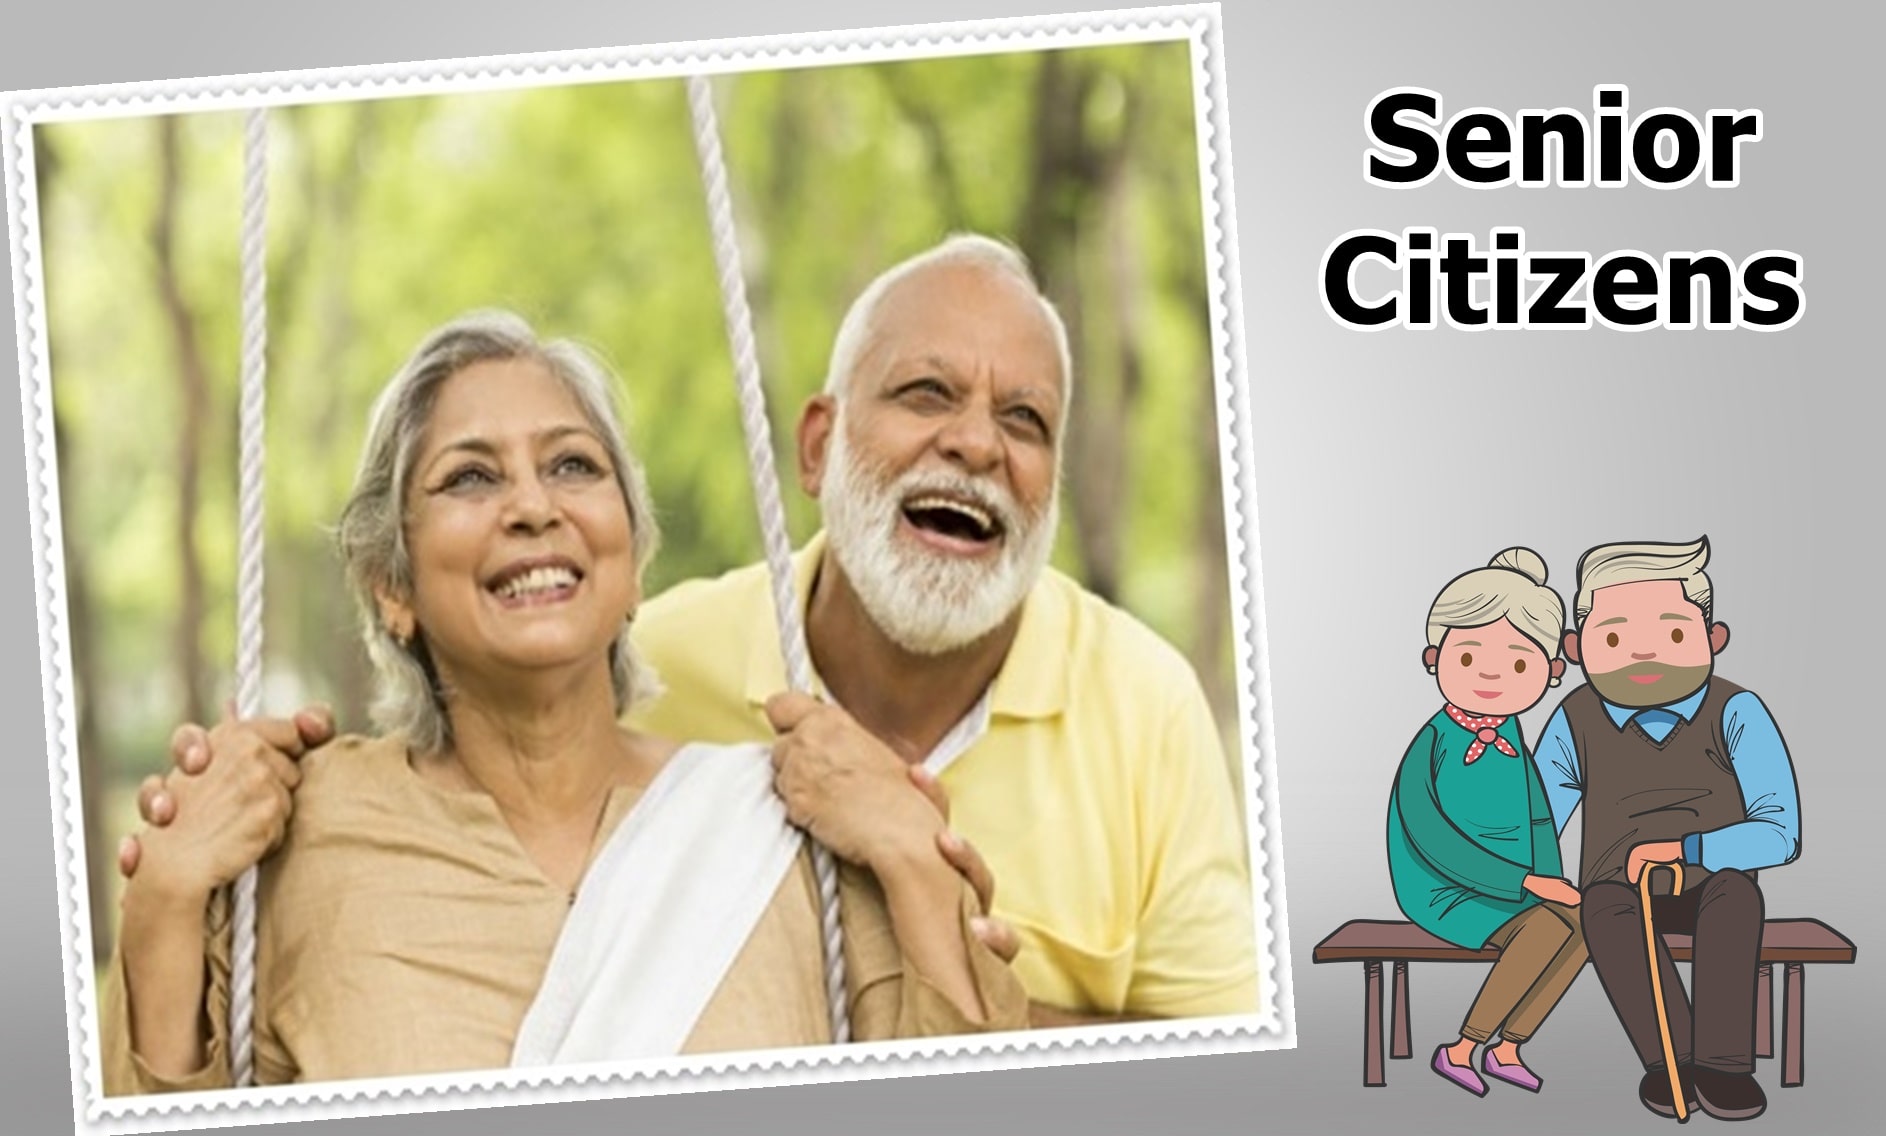 The Indian Government is assisting the elderly through schemes and benefits